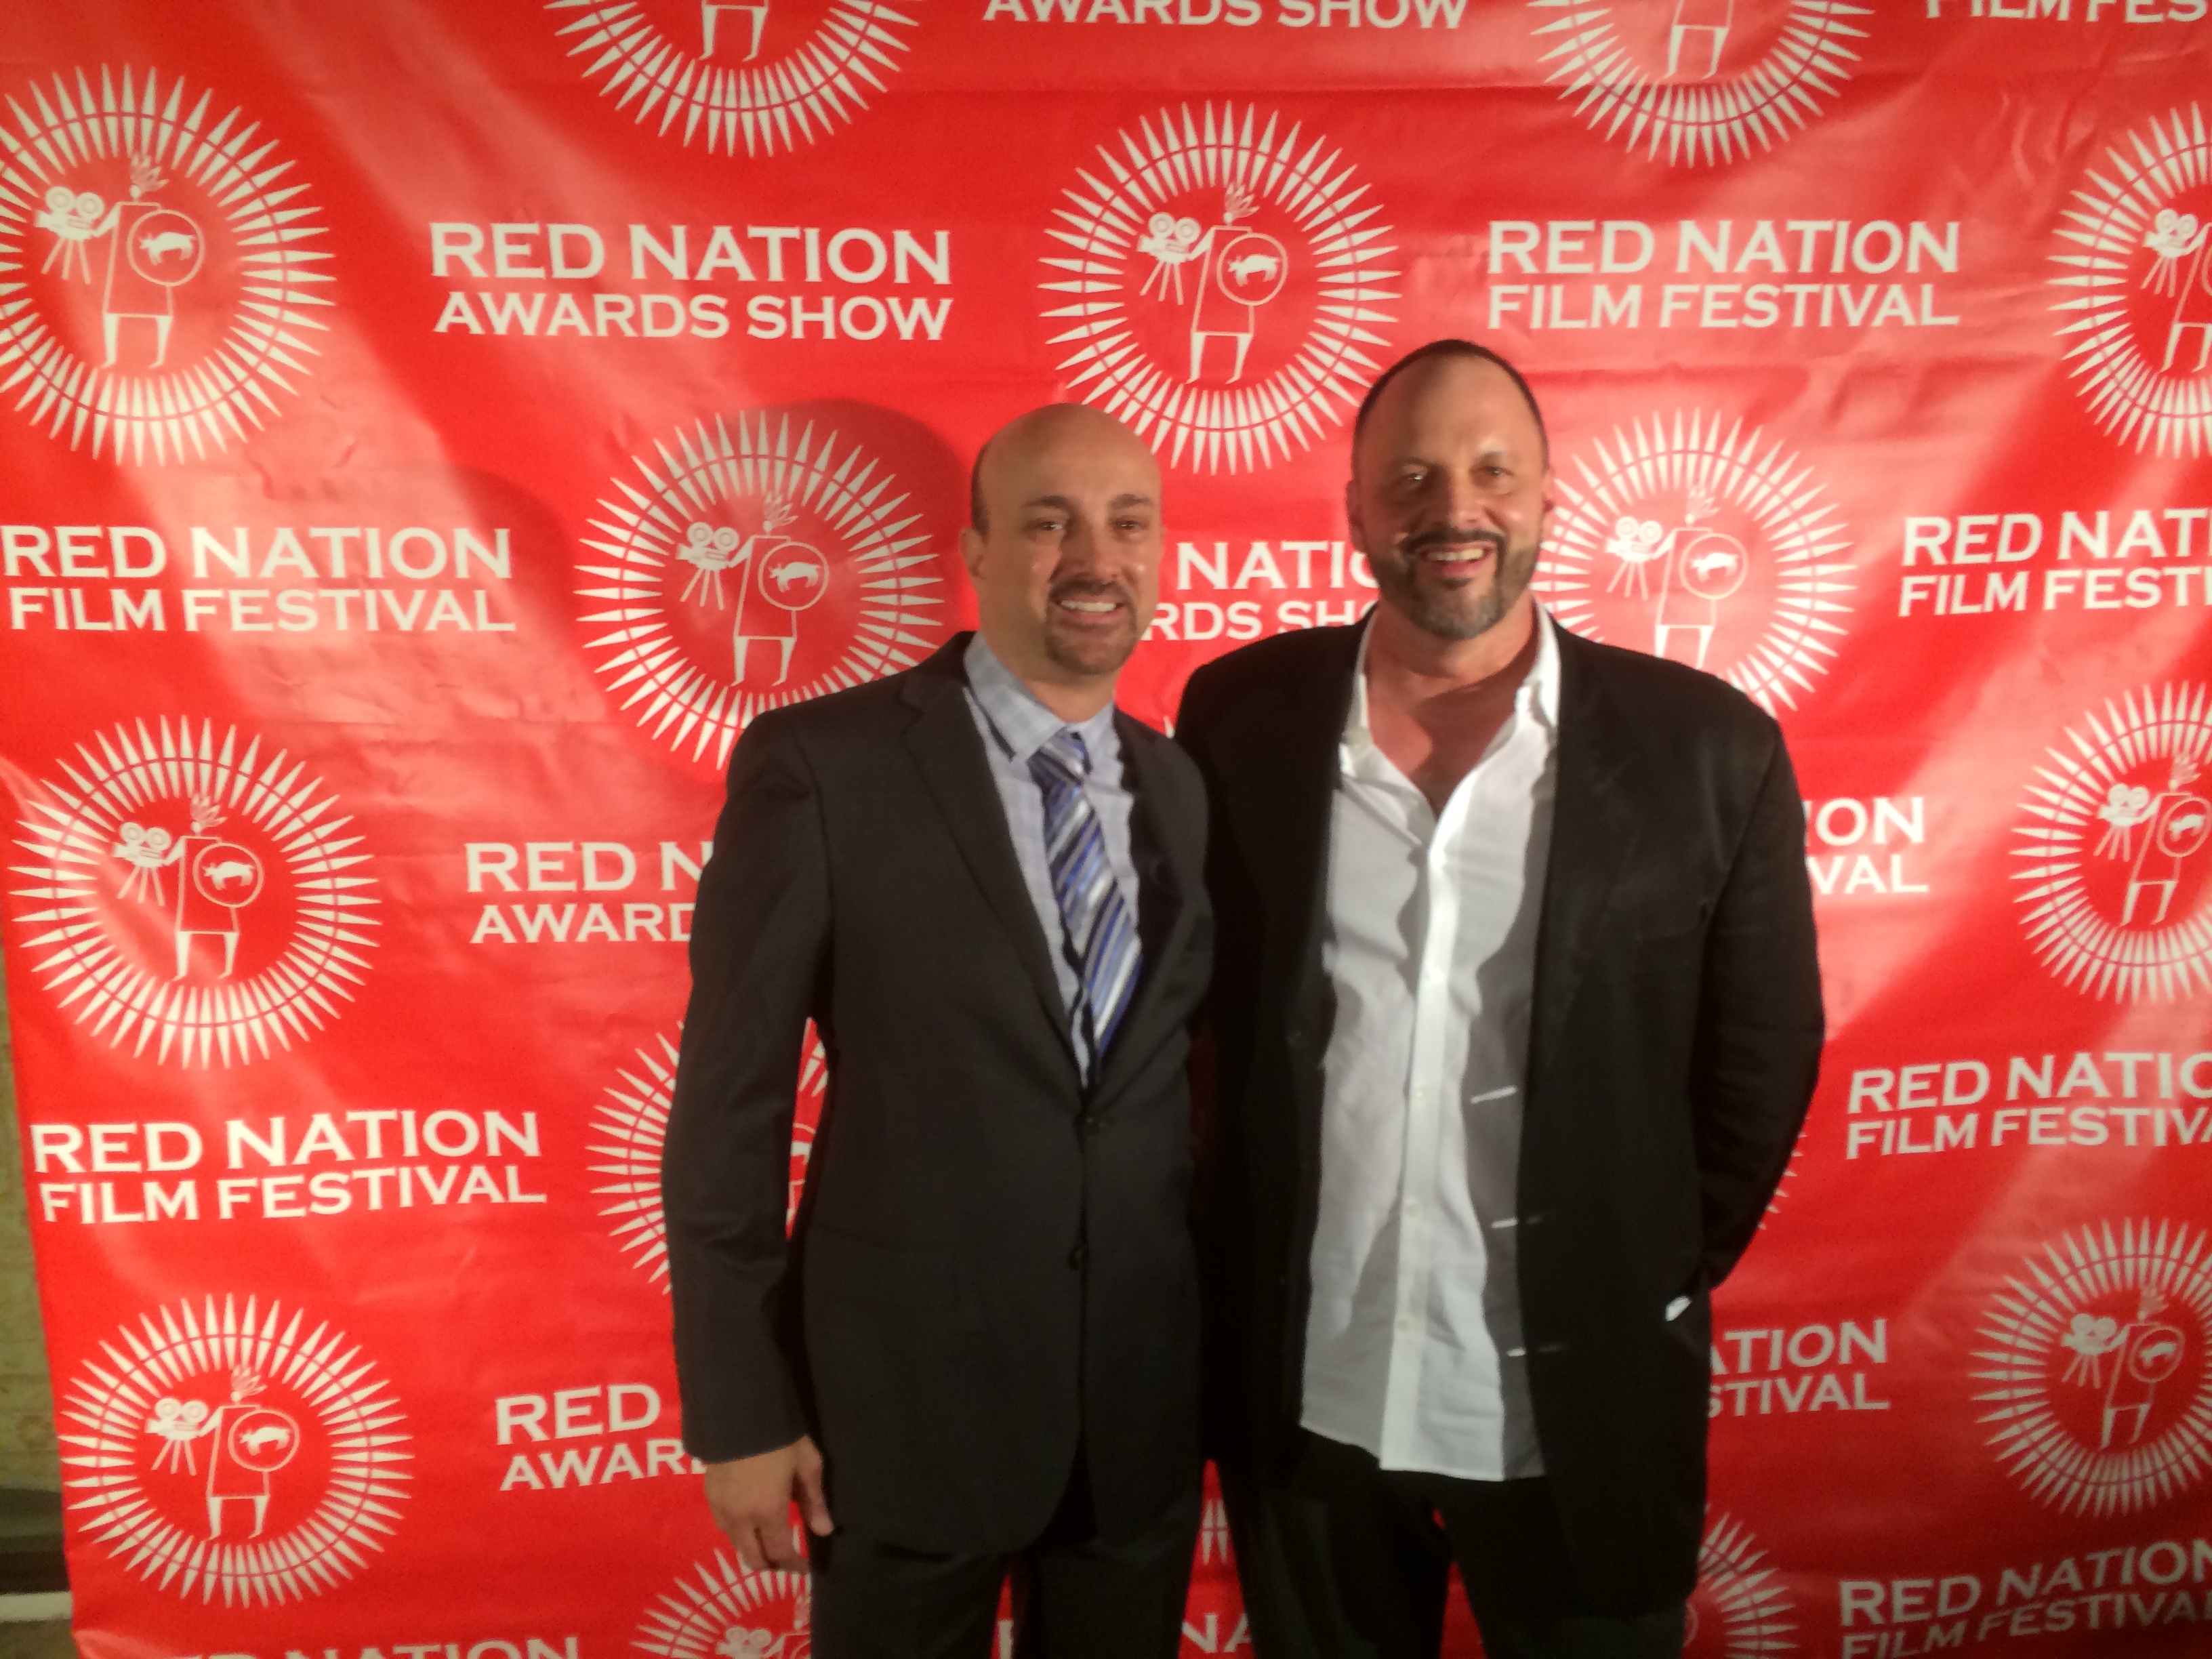 James Tumminia (actor/producer) and David Llauger Meiselman (director/producer) at premiere of 